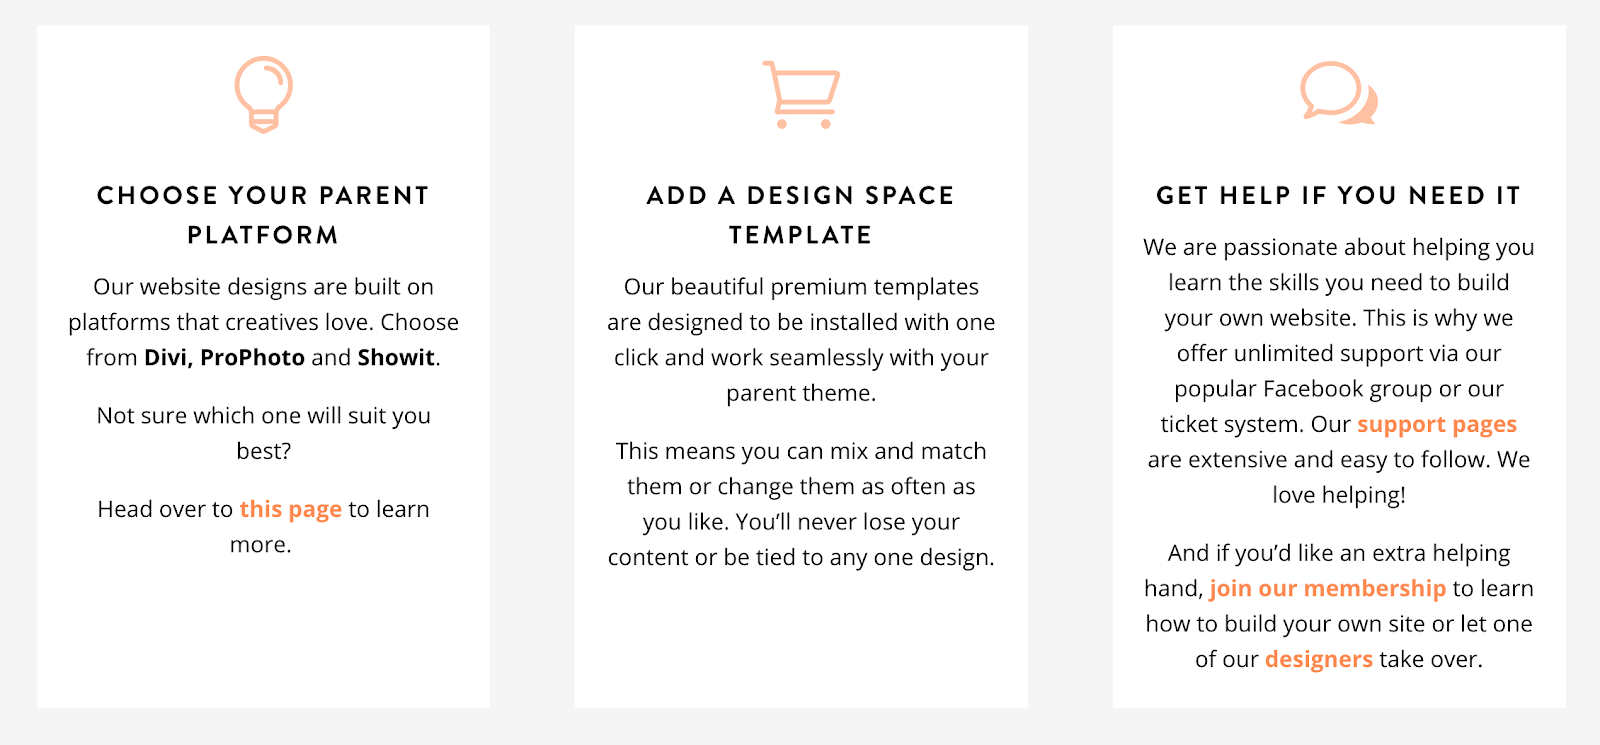 the design space options